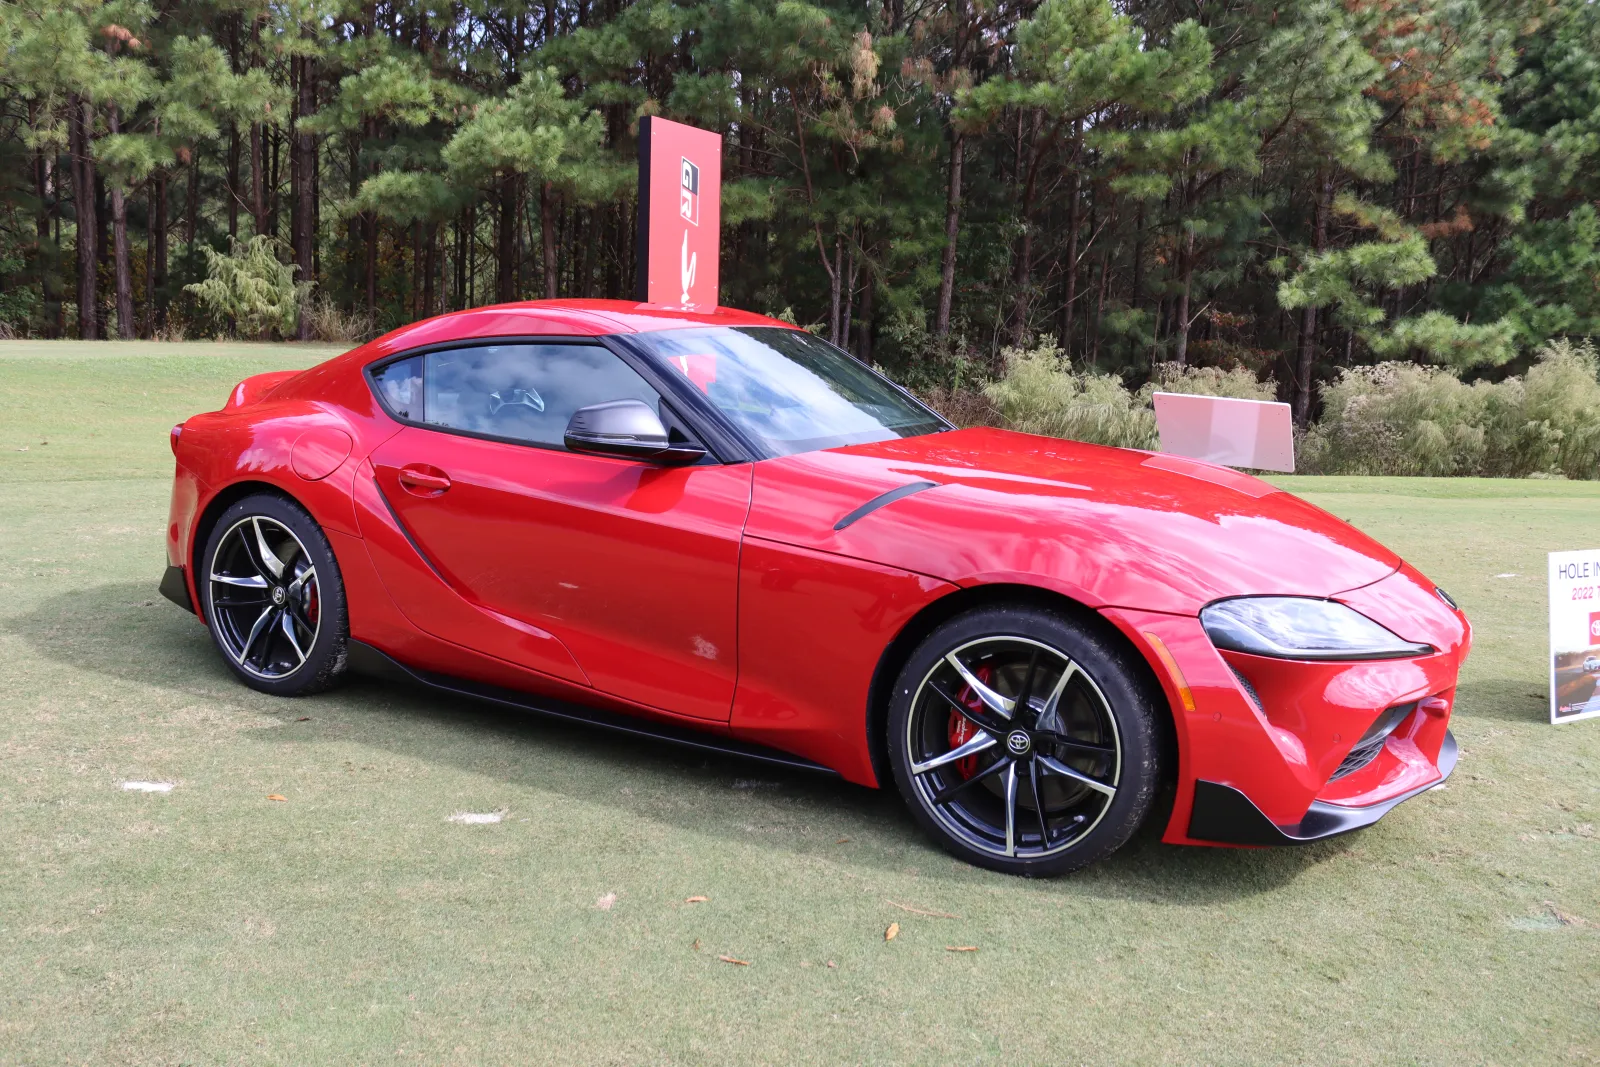 a red sports car parked on grass